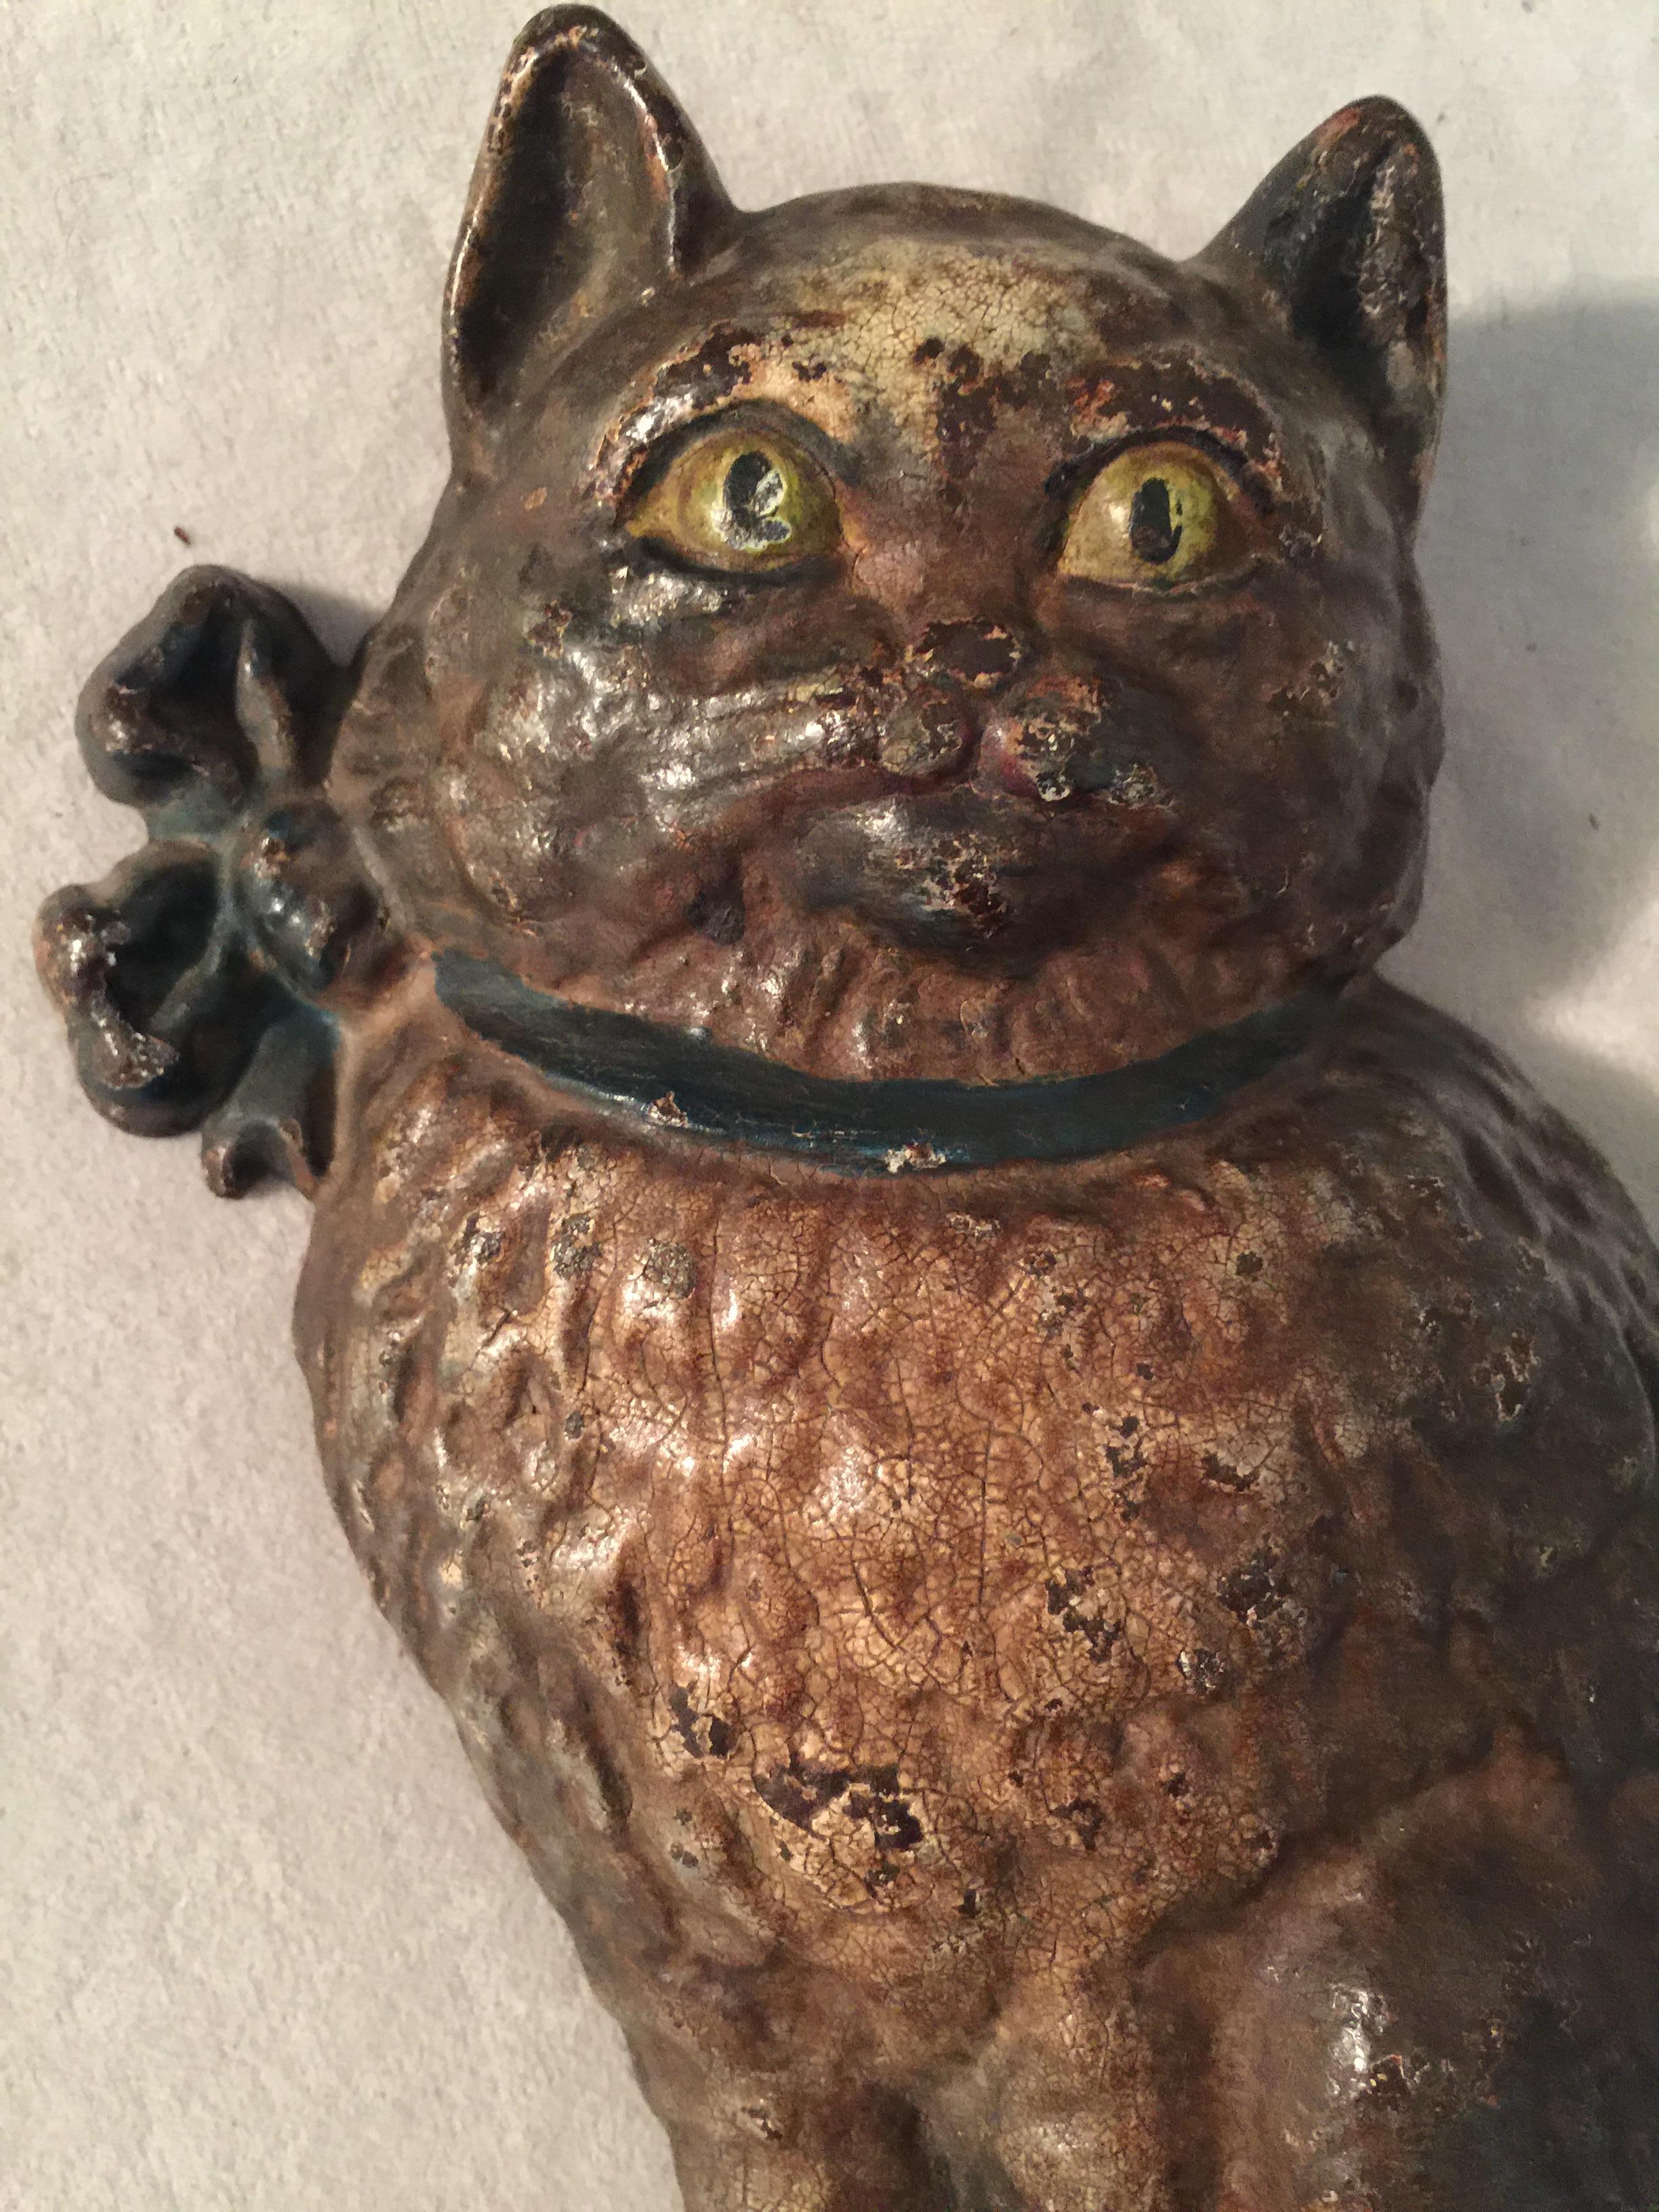 Cast iron doorstops are one of the most adored collectibles produced here in the U.S.A for several decades. Some of the most sought after examples are the animals. Here we have just that. This cat with the cute expression, ribbon collar, and